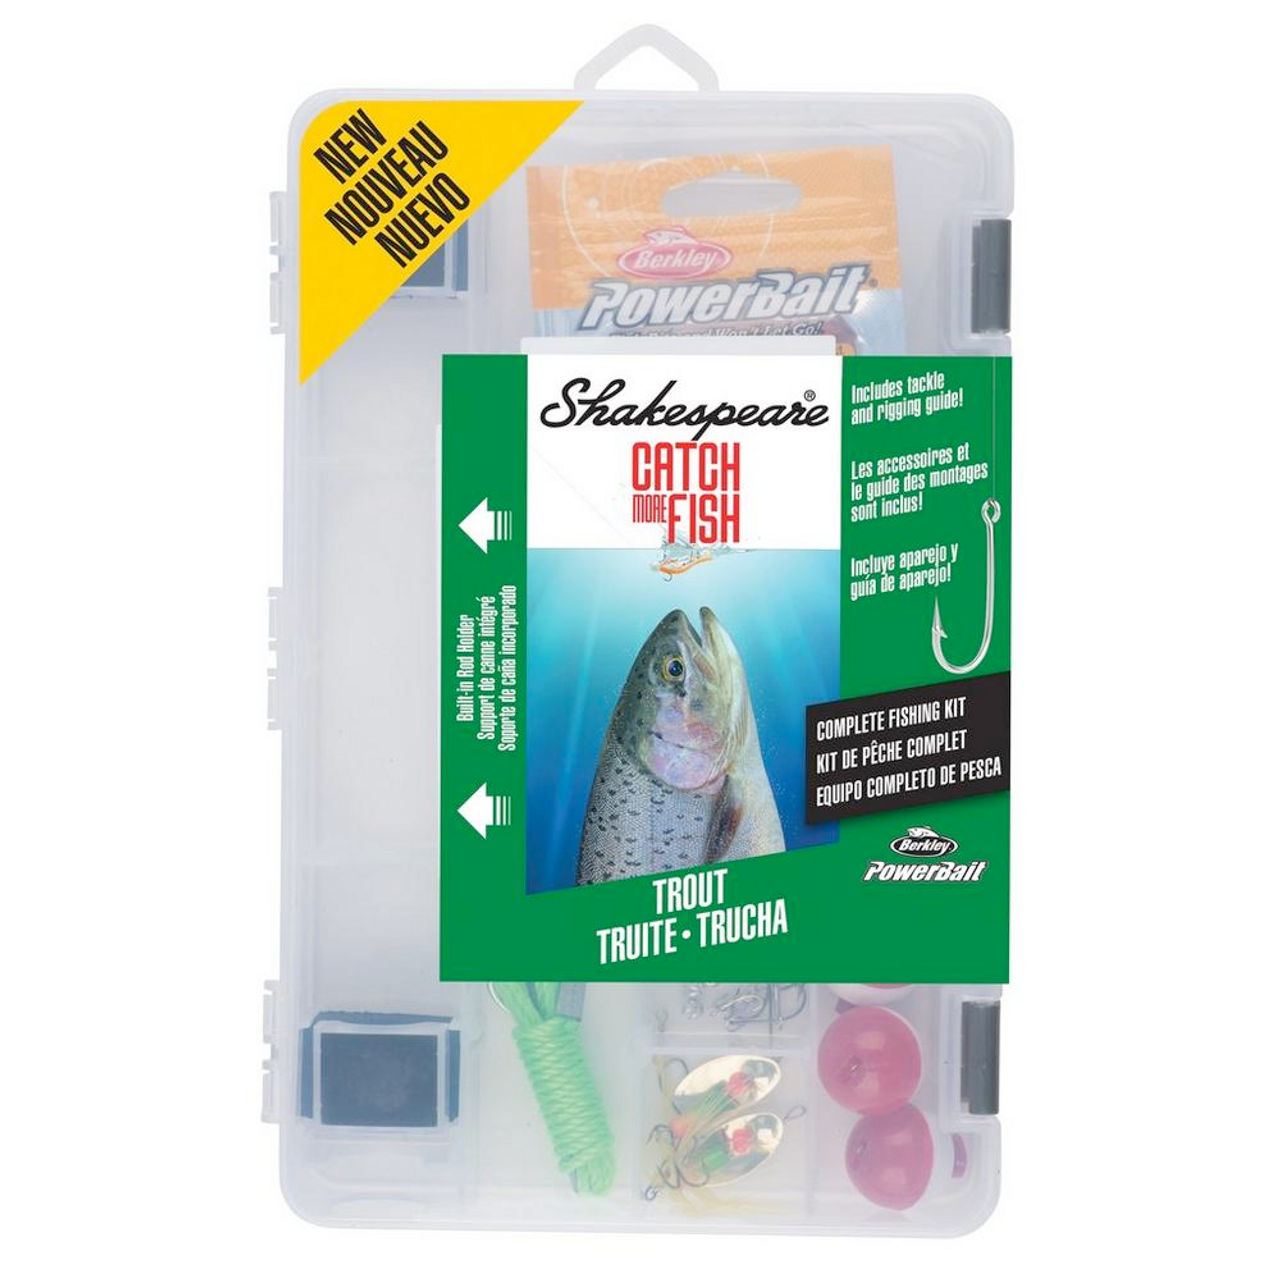 Shakespeare "Catch More Fish" Tackle Box Kit, Trout